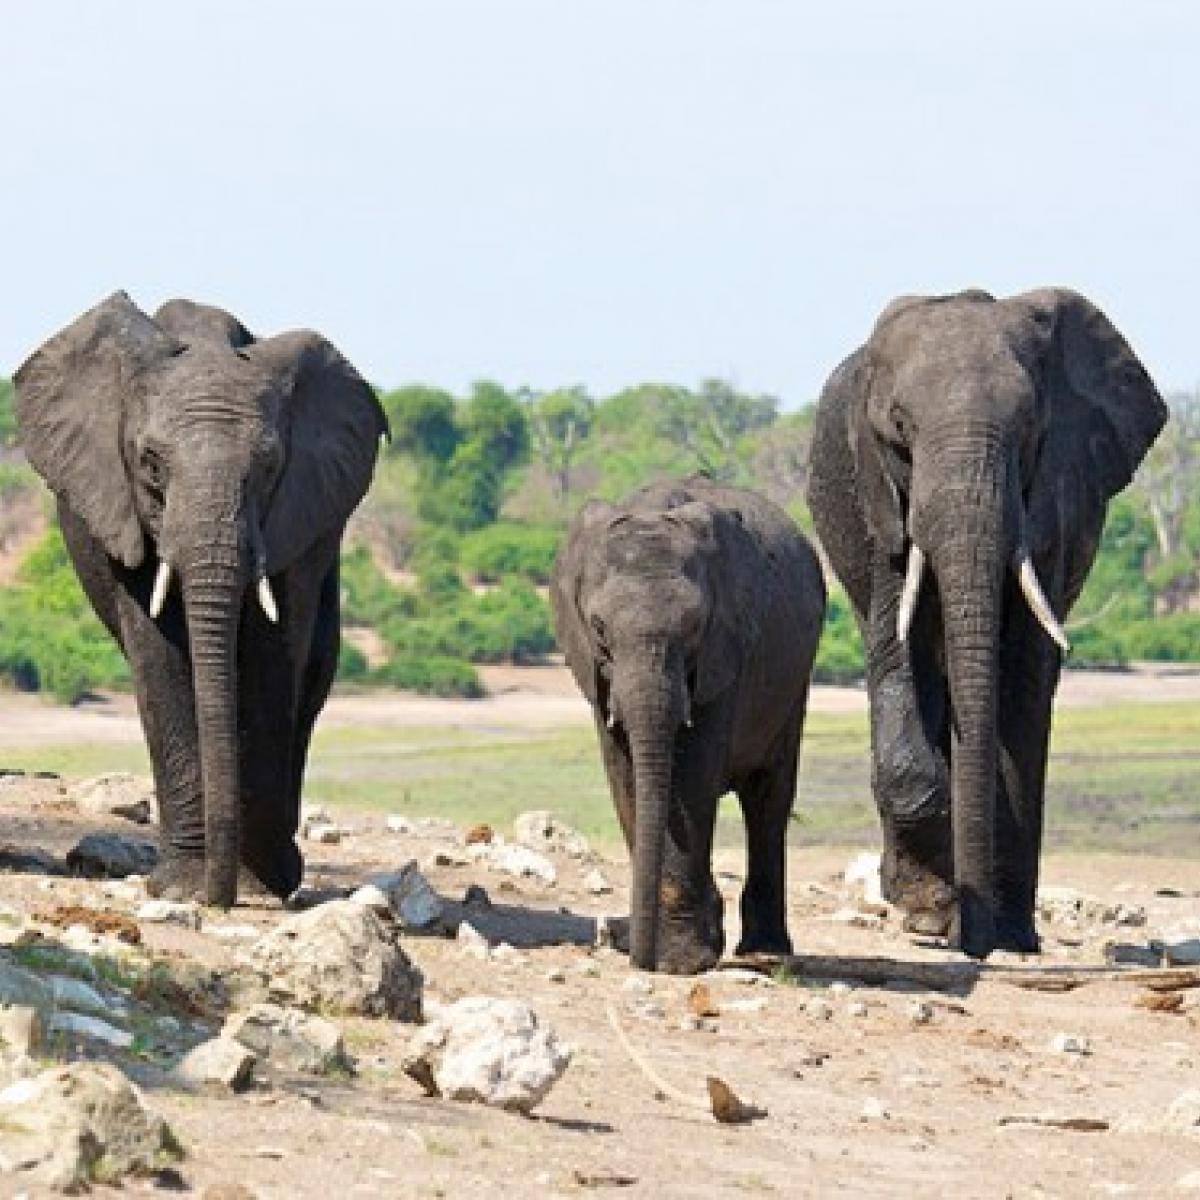 Elephants in the KAZA Transfrontier Conservation Area